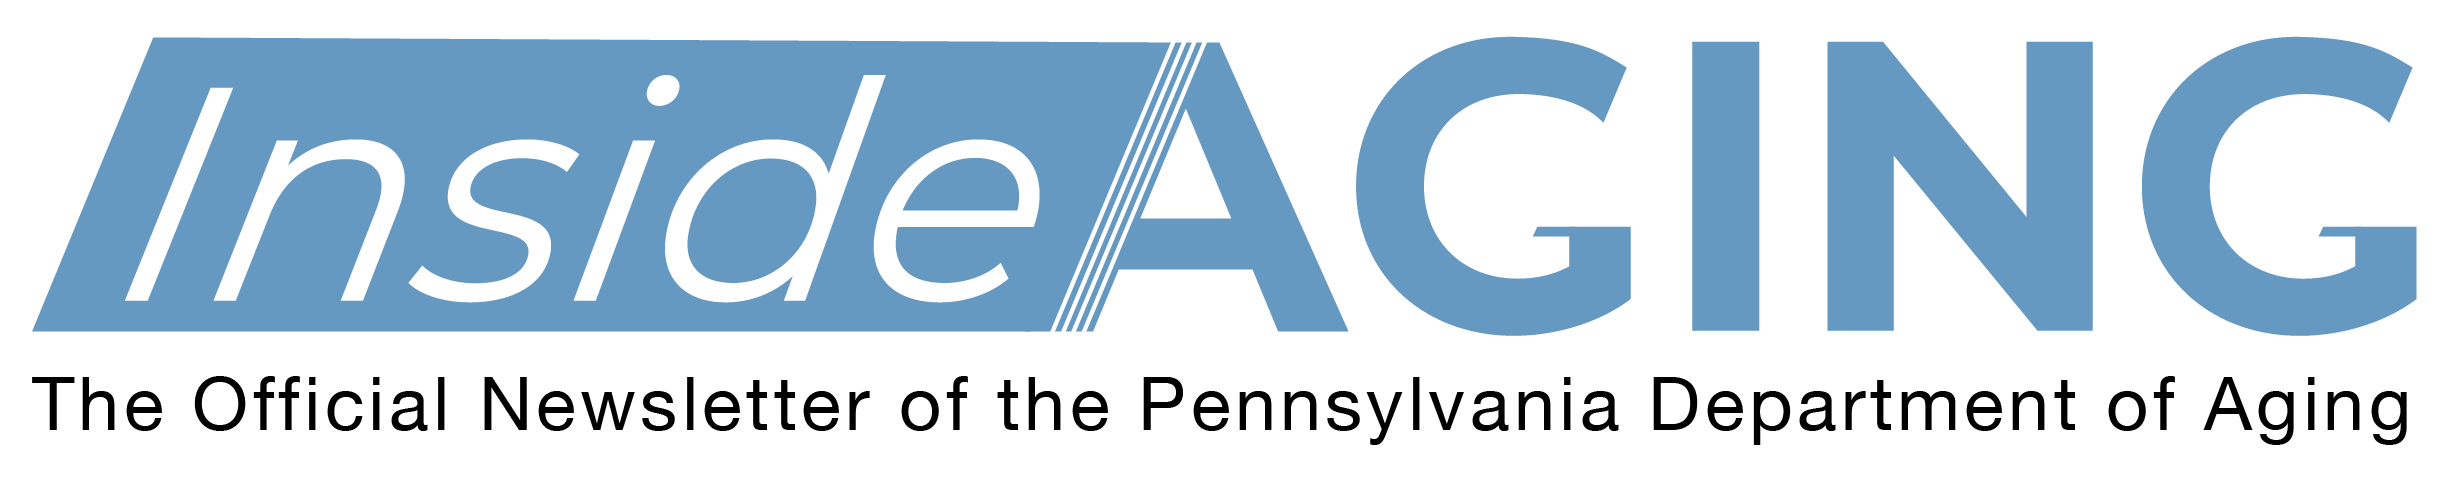 Inside Aging: The Official Newsletter of the Pennsylvania Department of Aging